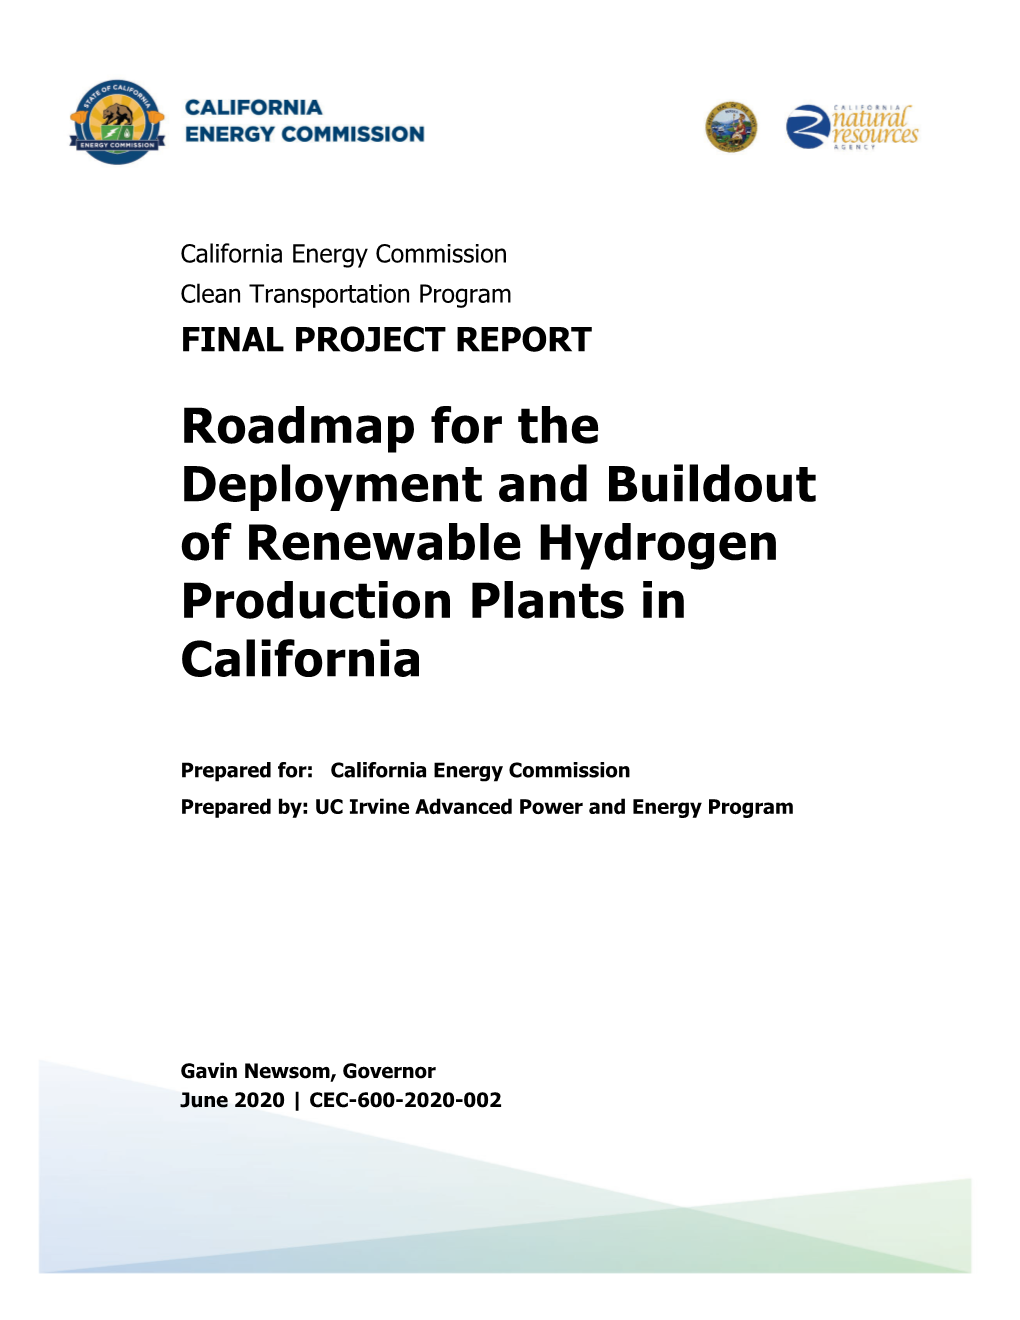 Roadmap for the Deployment and Buildout of Renewable Hydrogen Production Plants in California